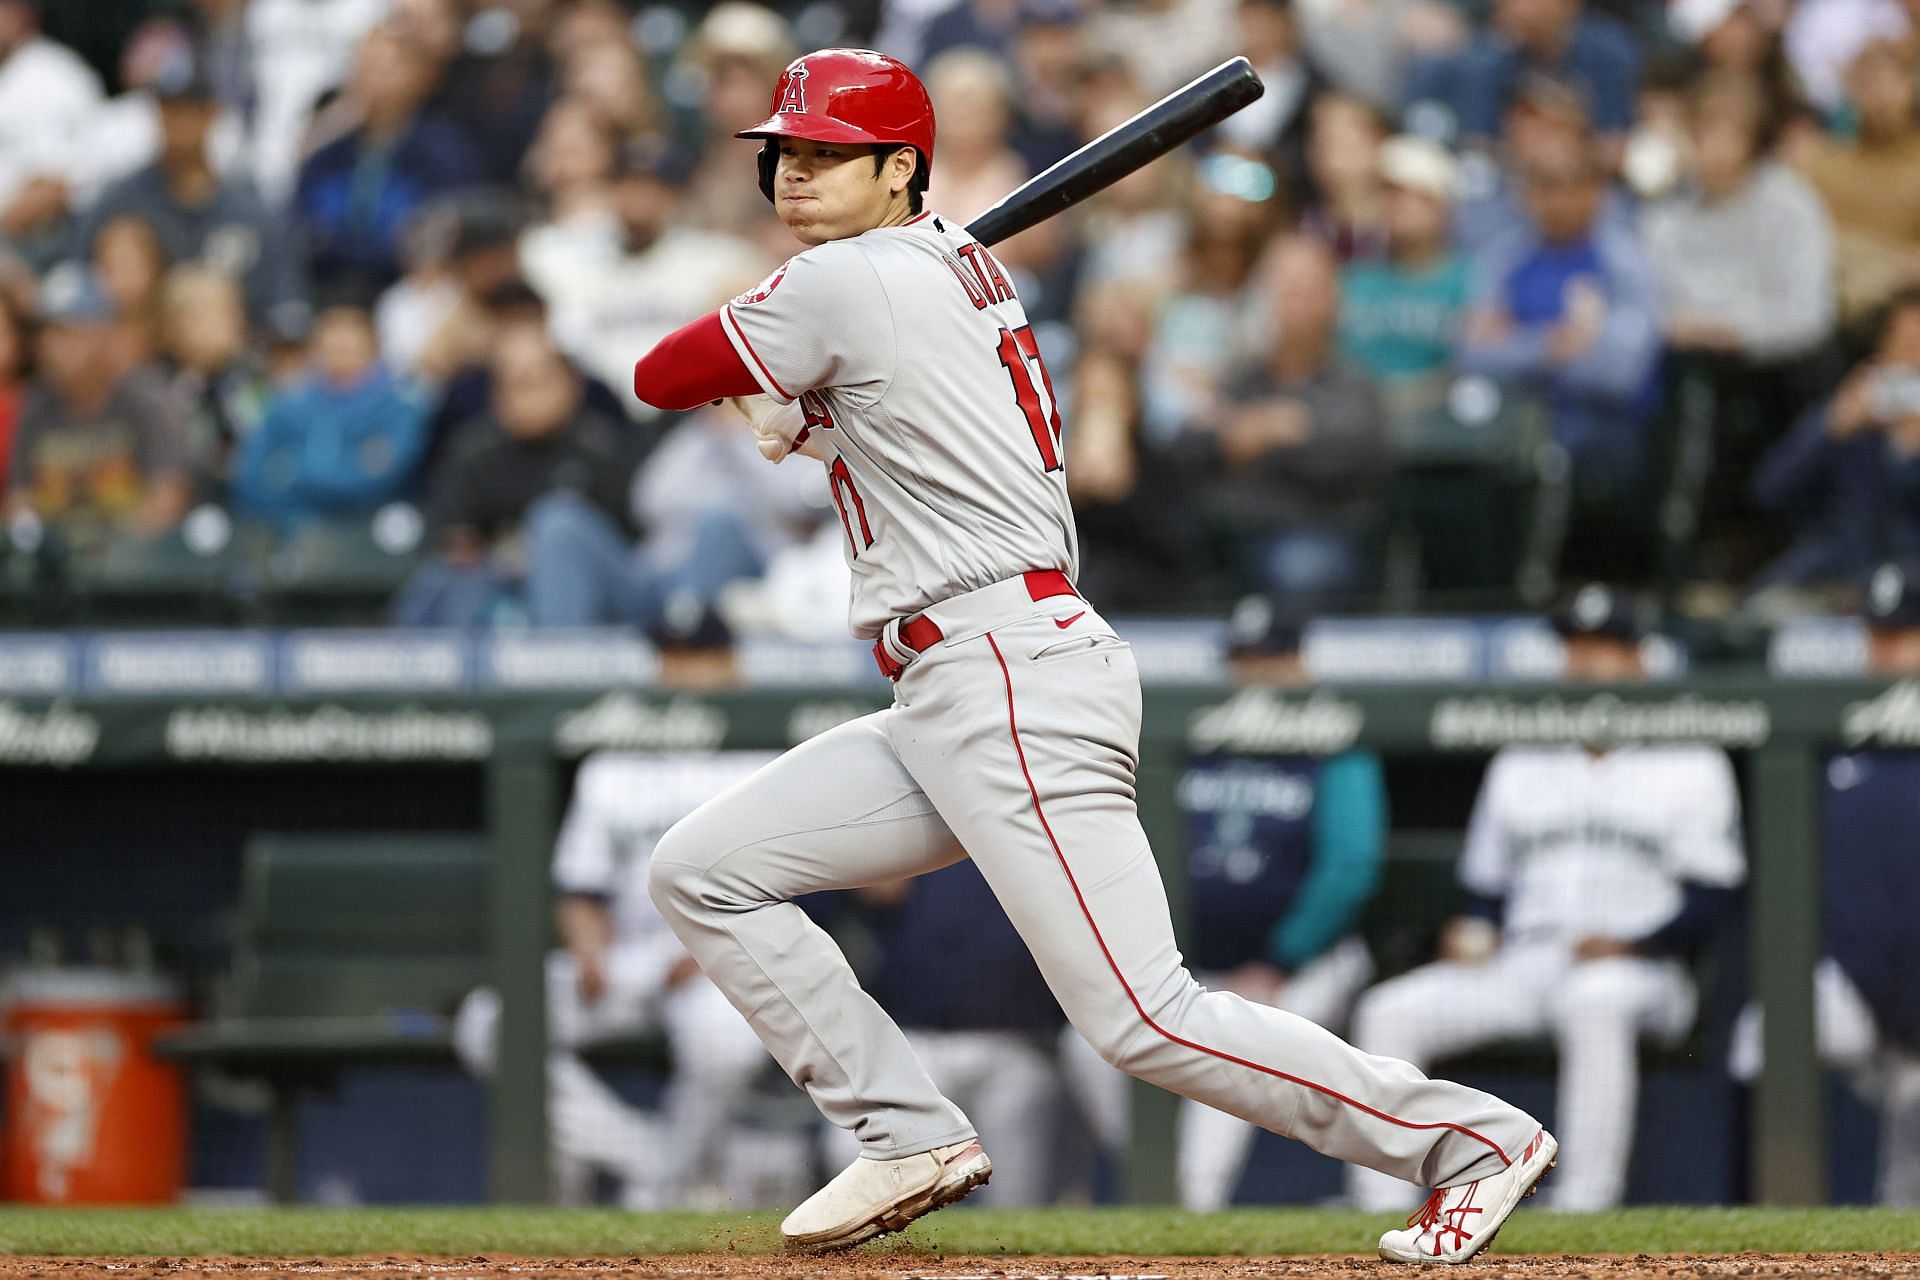 Two-way Japanese phenom Shohei Ohtani bats for the Los Angeles Angels against the Seattle Mariners.